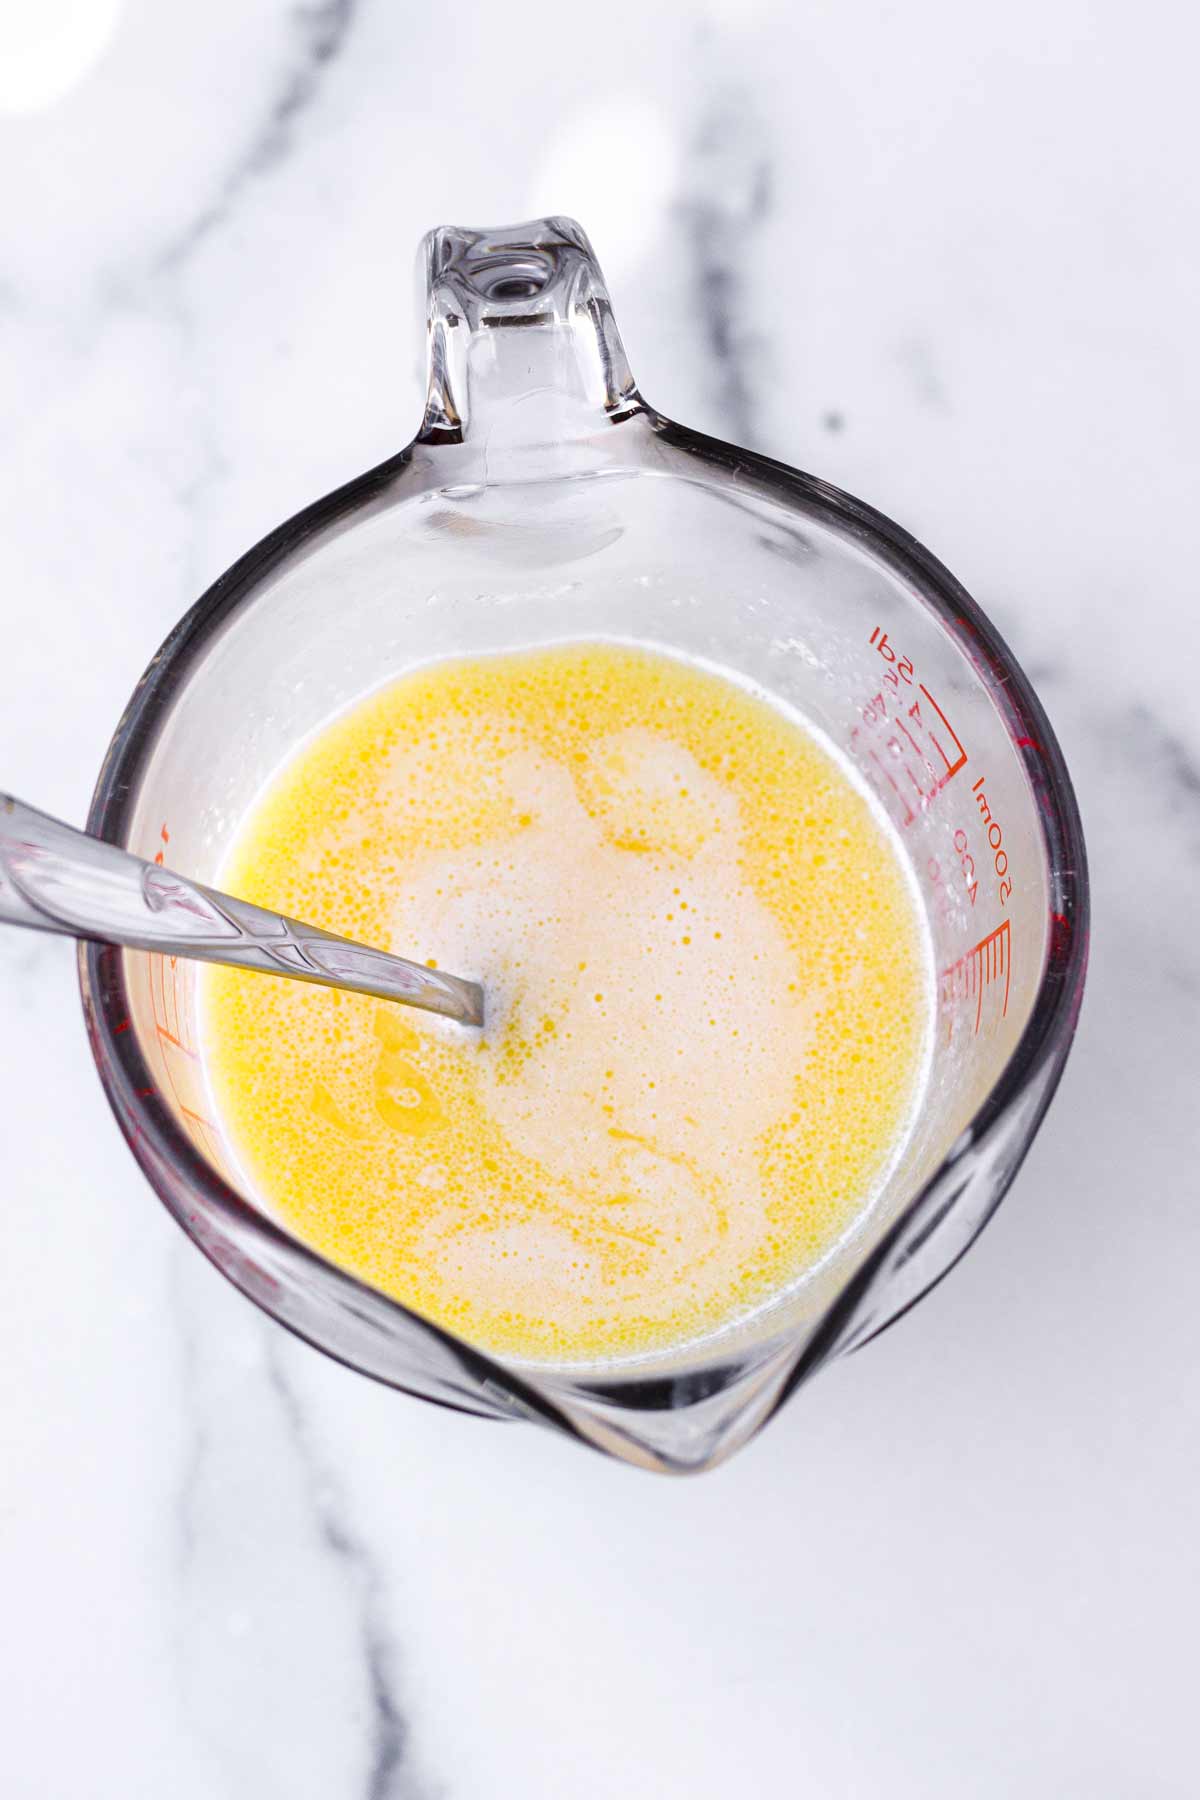 melted butter and cream in a glass measuring cup